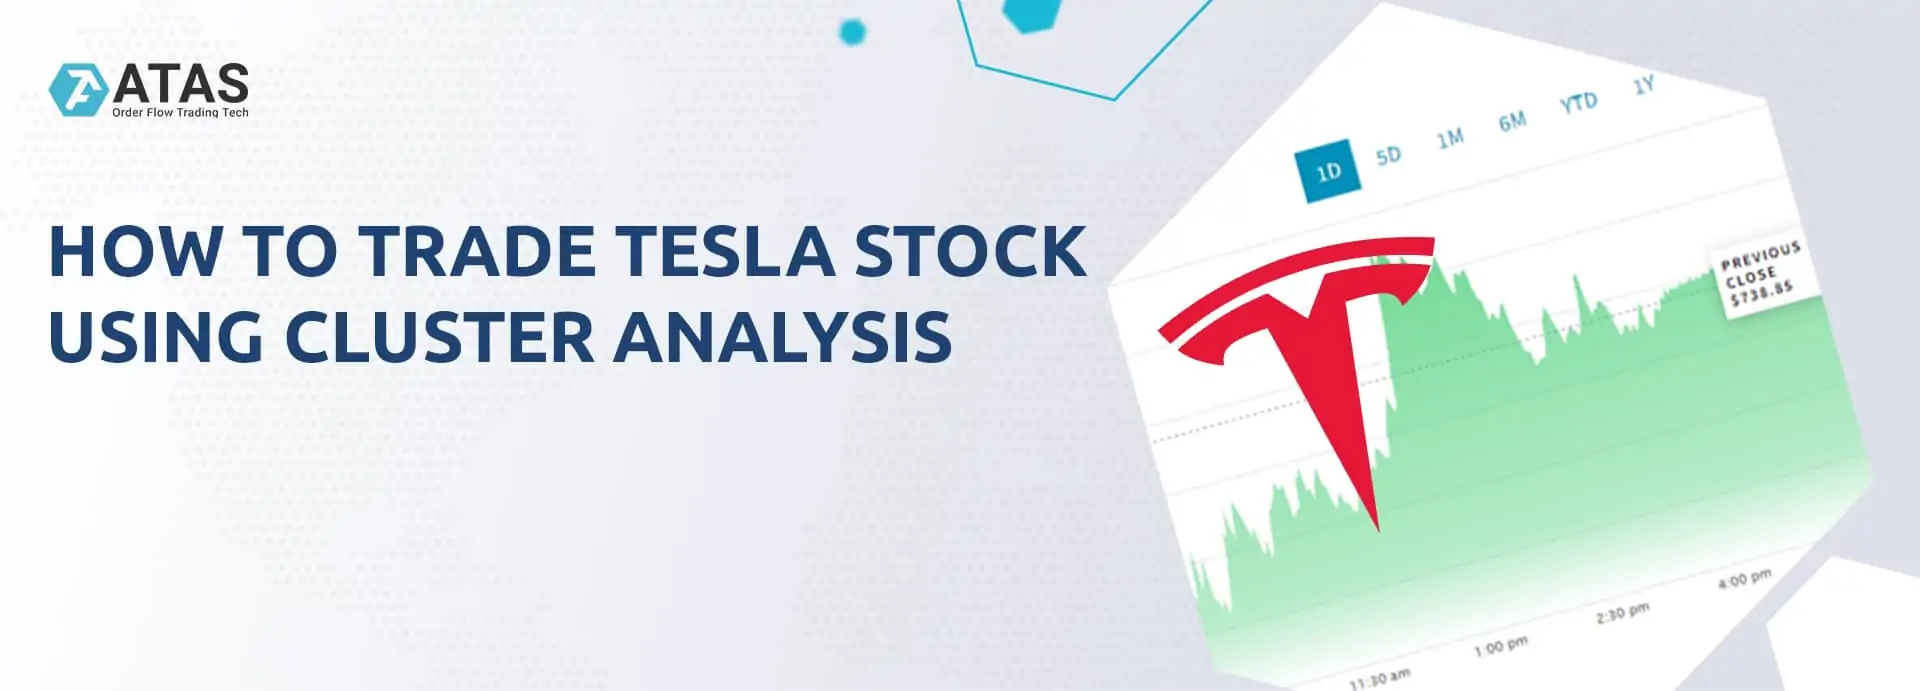 How to trade Tesla stock using cluster analysis